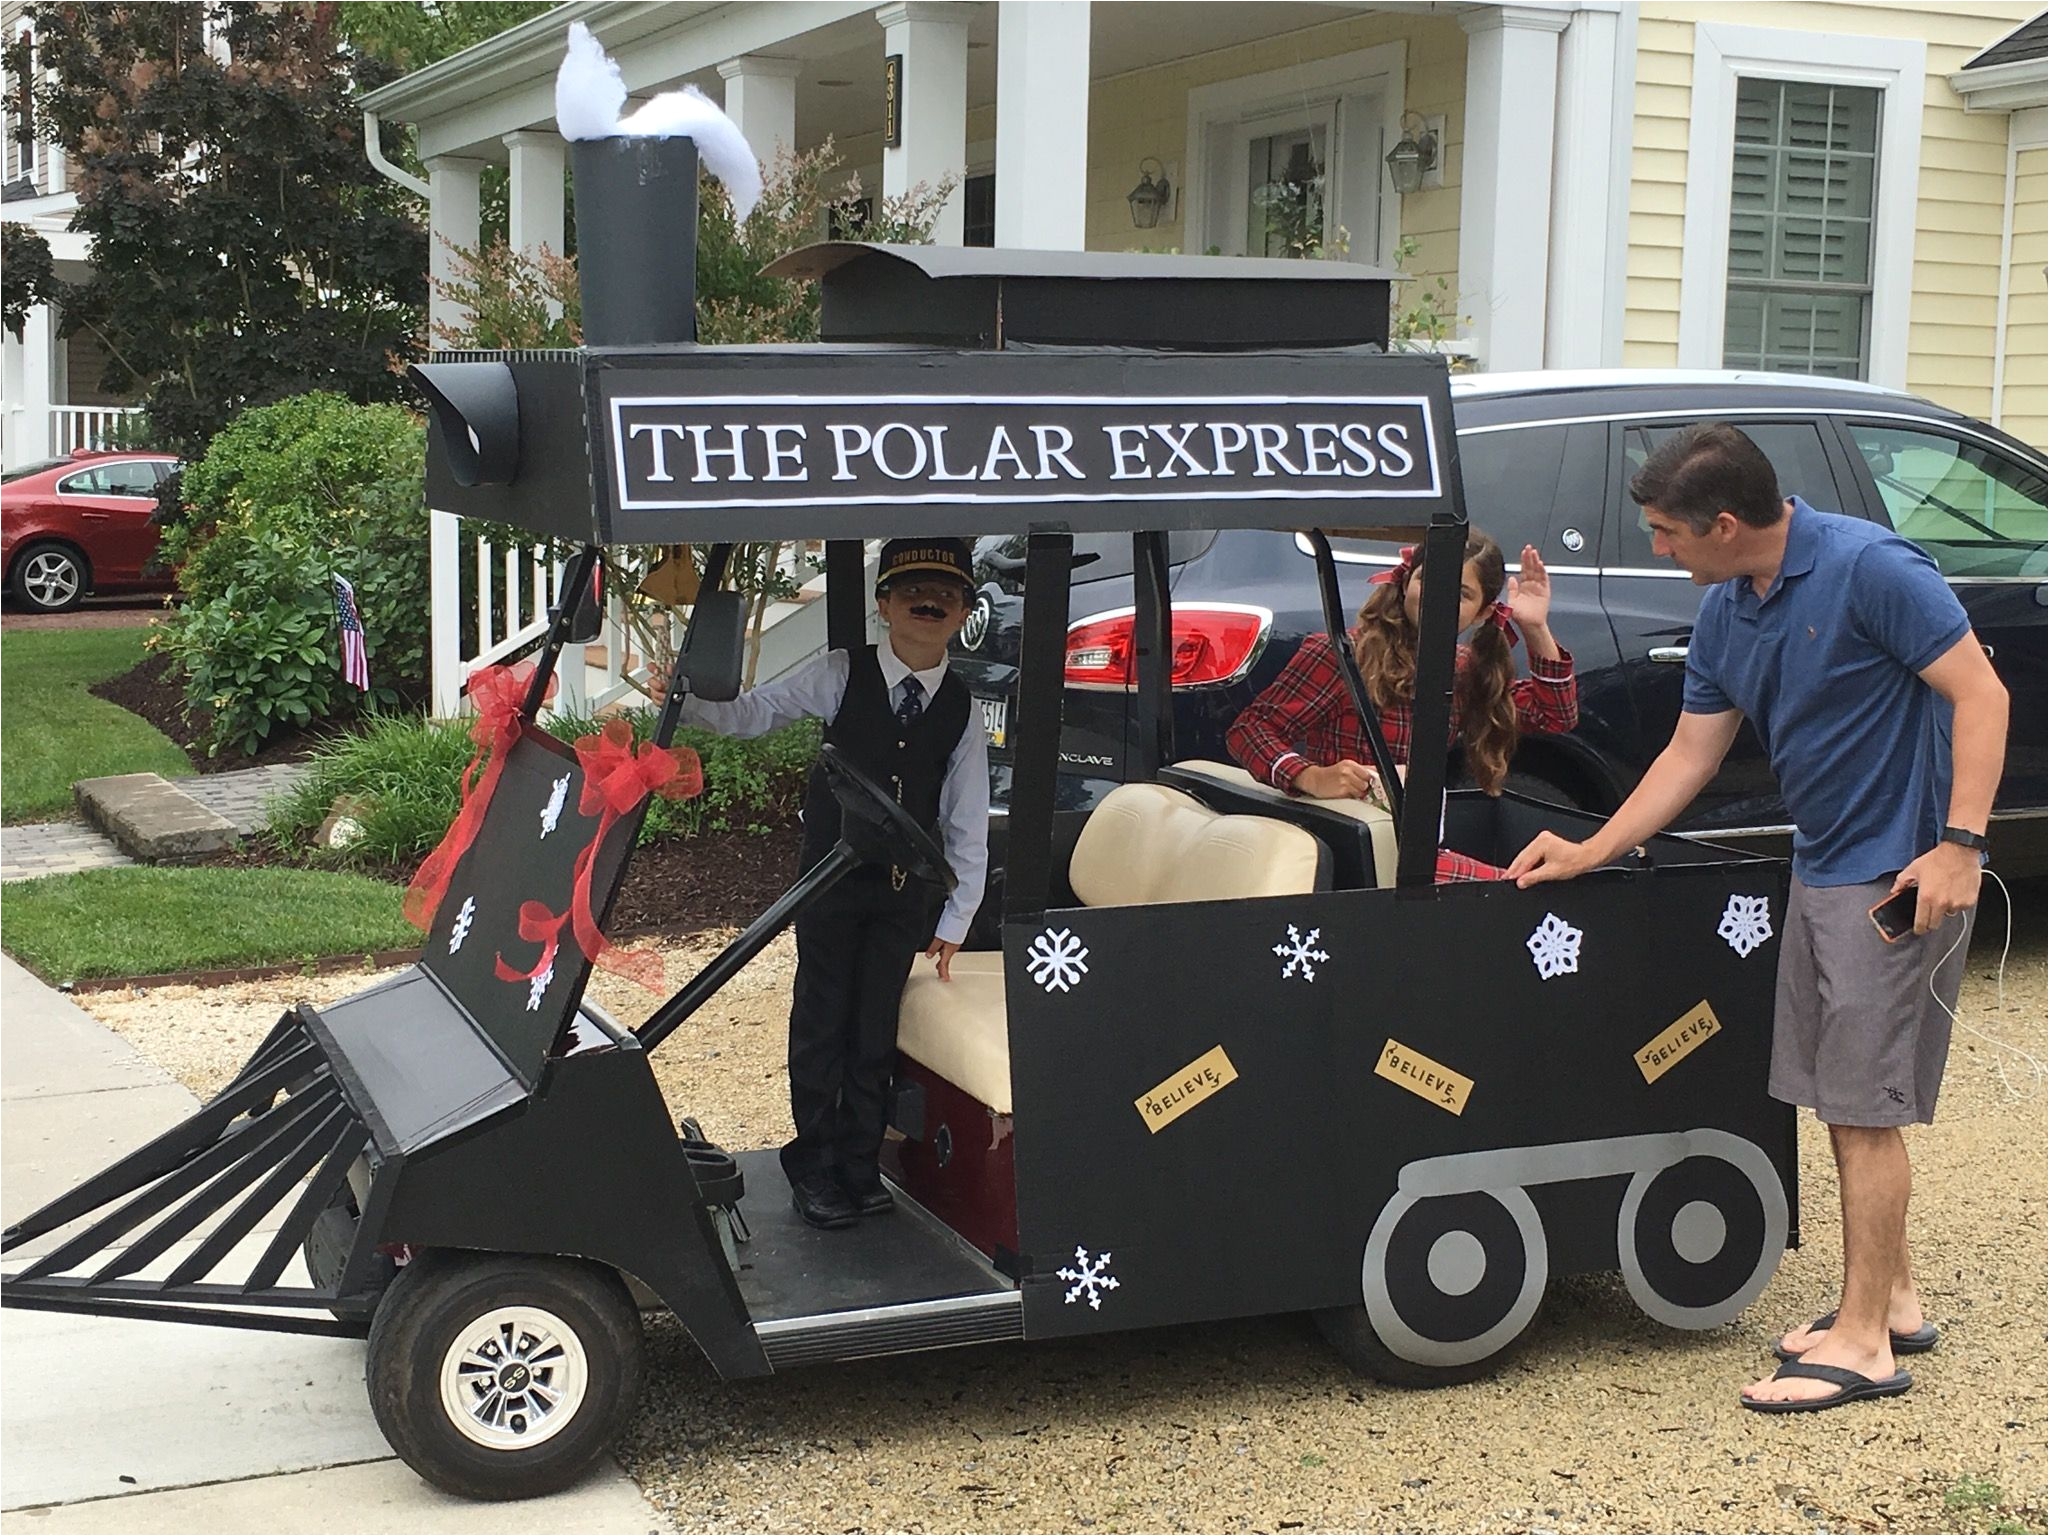 entry in golf cart parade july 2016 see blog for details http